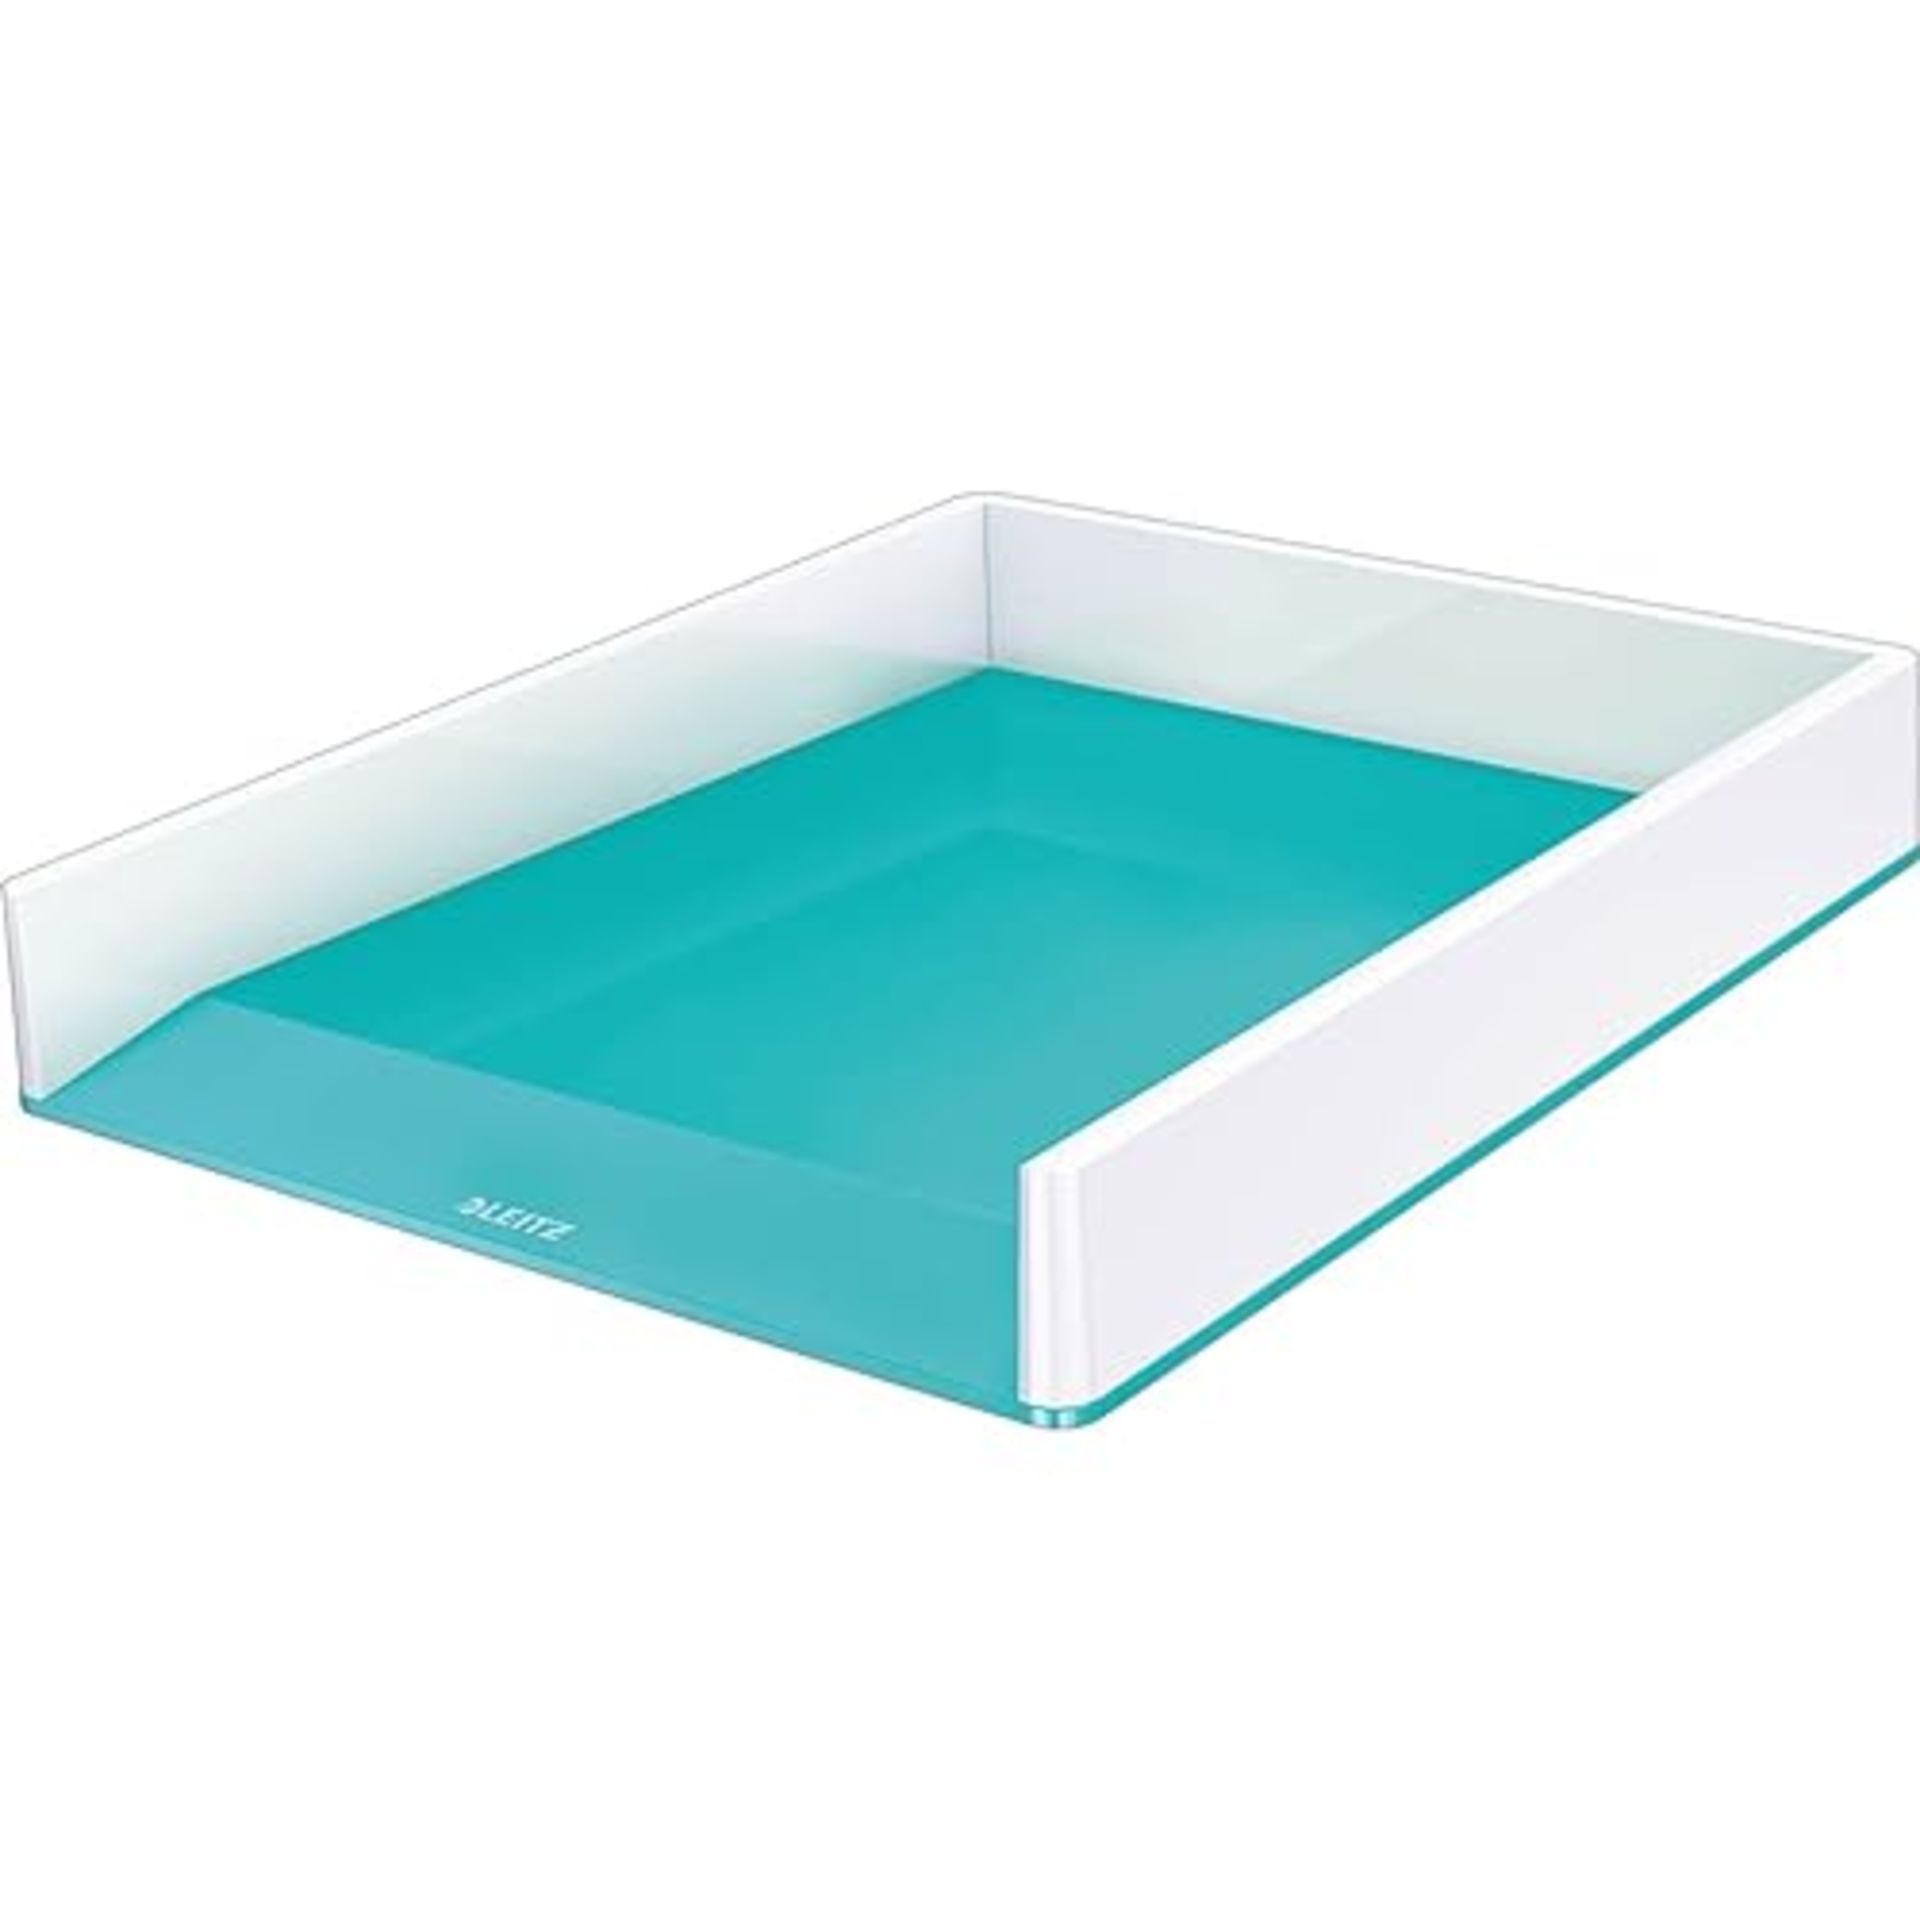 Leitz WOW Letter Tray Dual Colour, Ice Blue